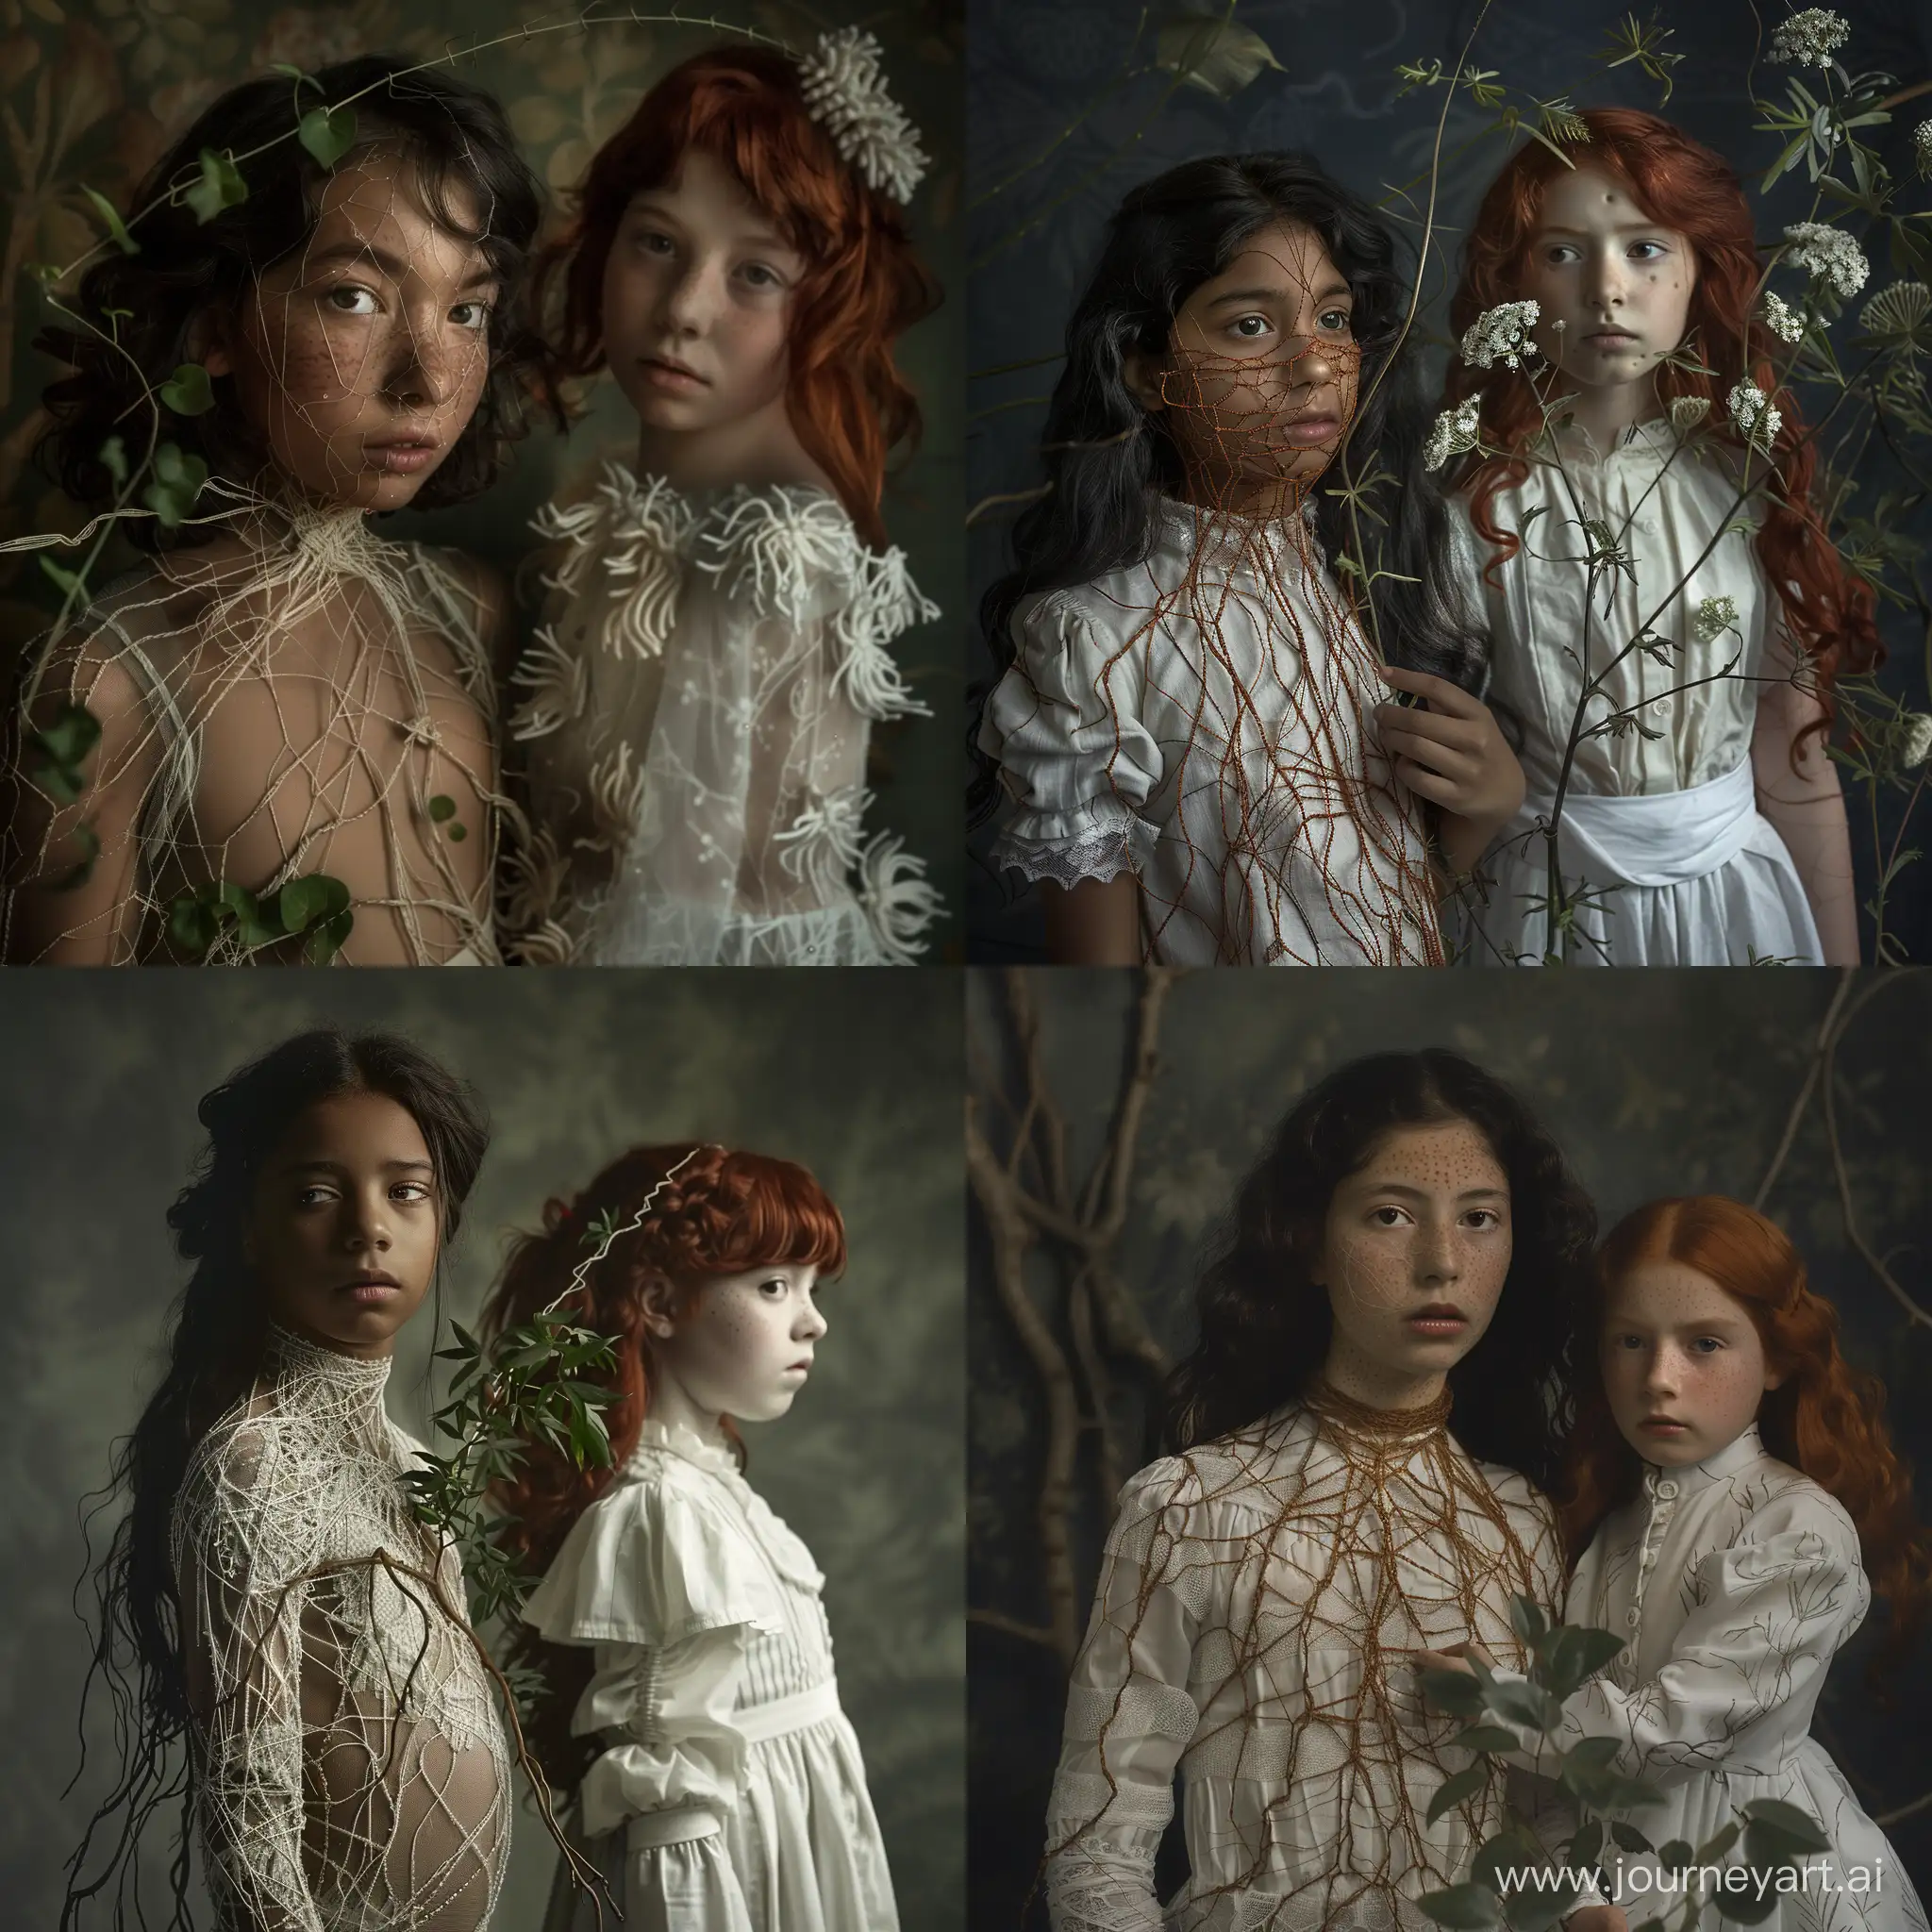 Mystical-Connection-DarkHaired-Woman-with-Intricate-Nervous-System-Weavings-and-RedHaired-Girl-in-White-Plant-Fabrics